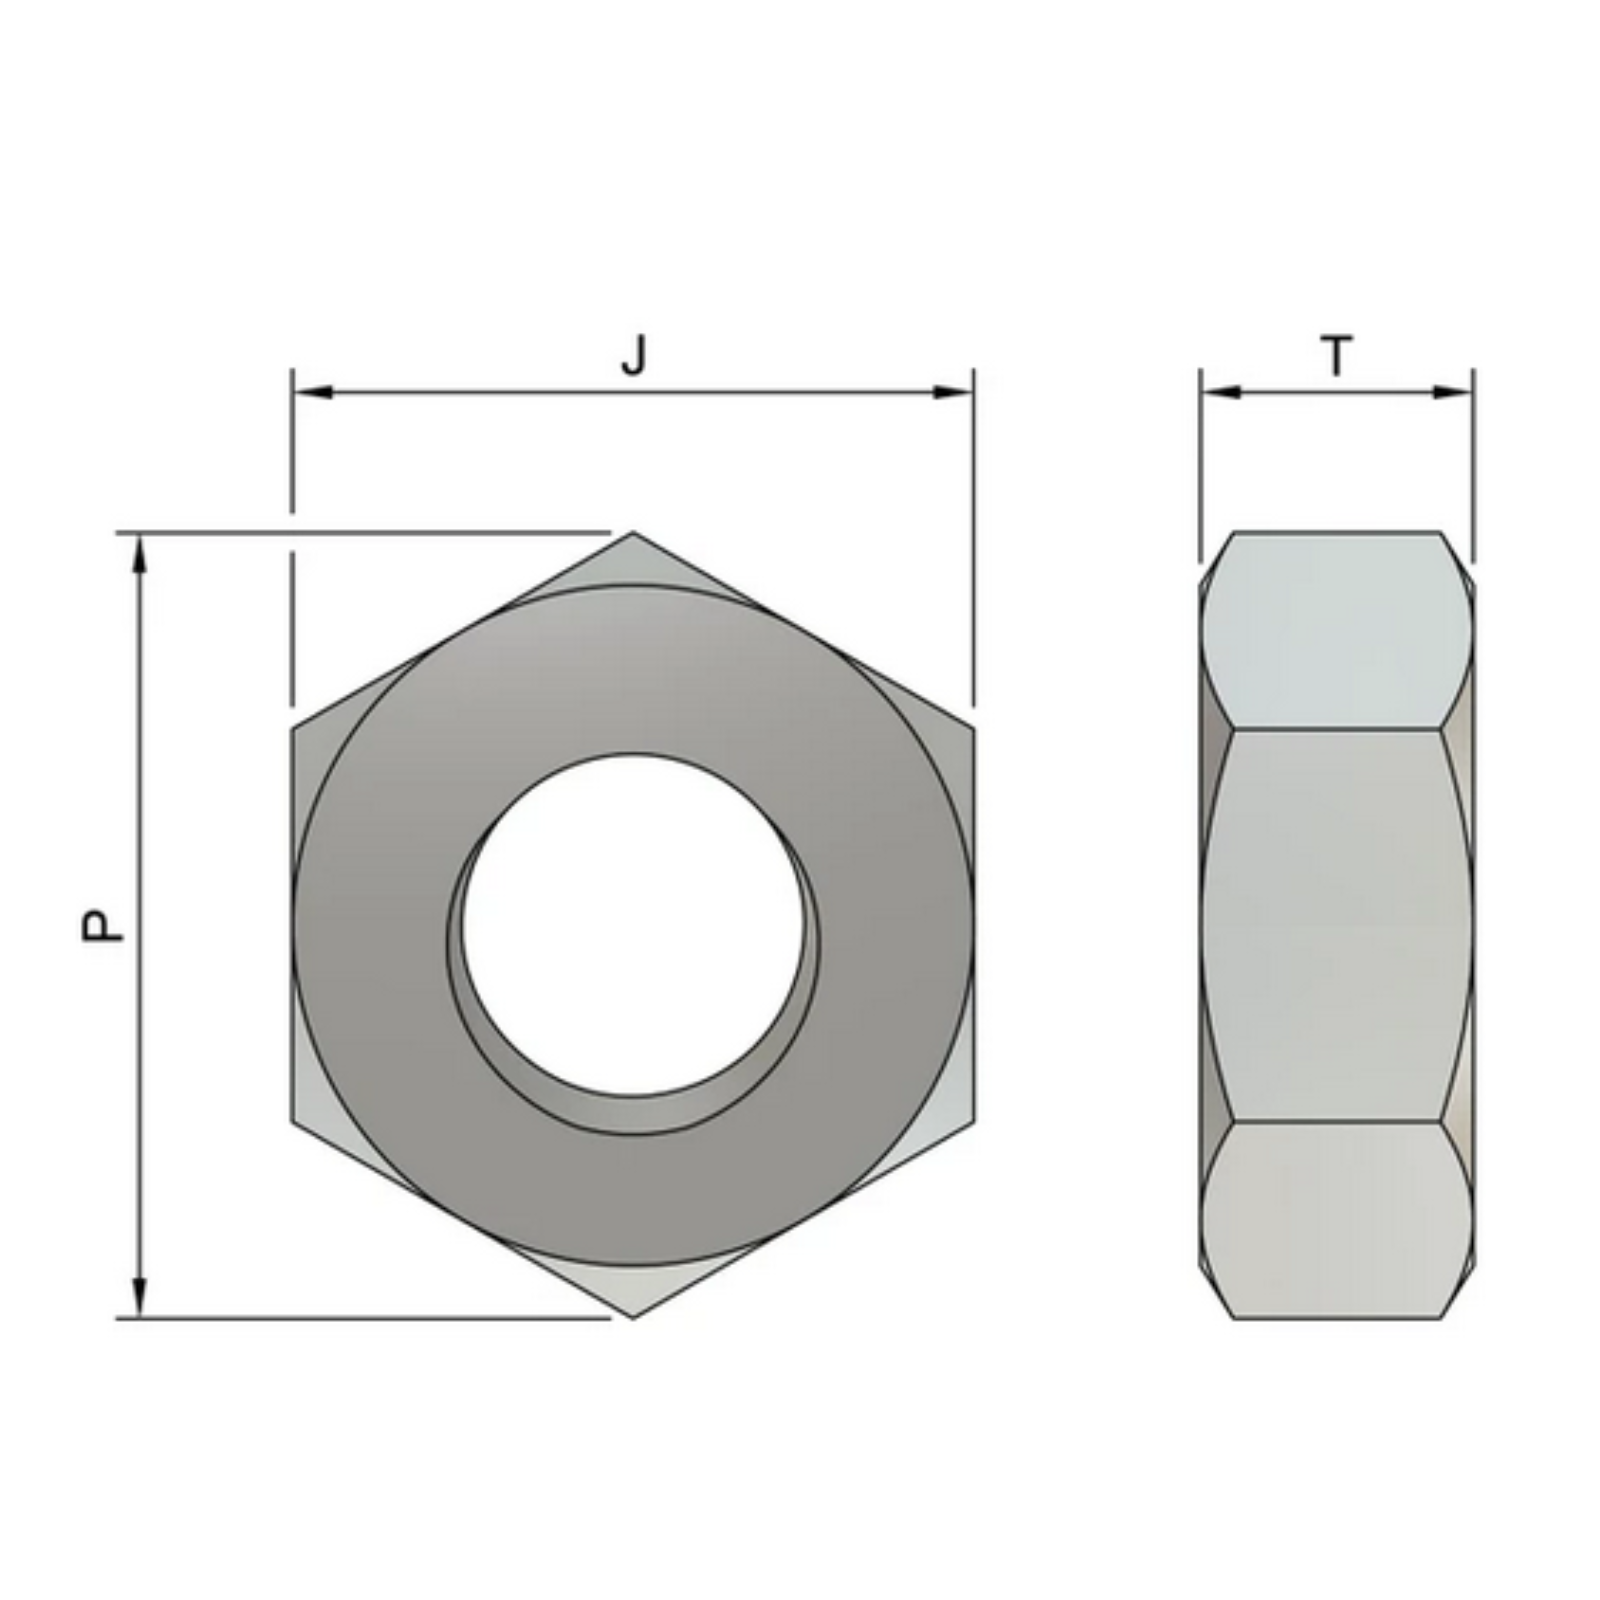 M8 Hexagon Nuts (DIN 934) - Stainless Steel (A4)